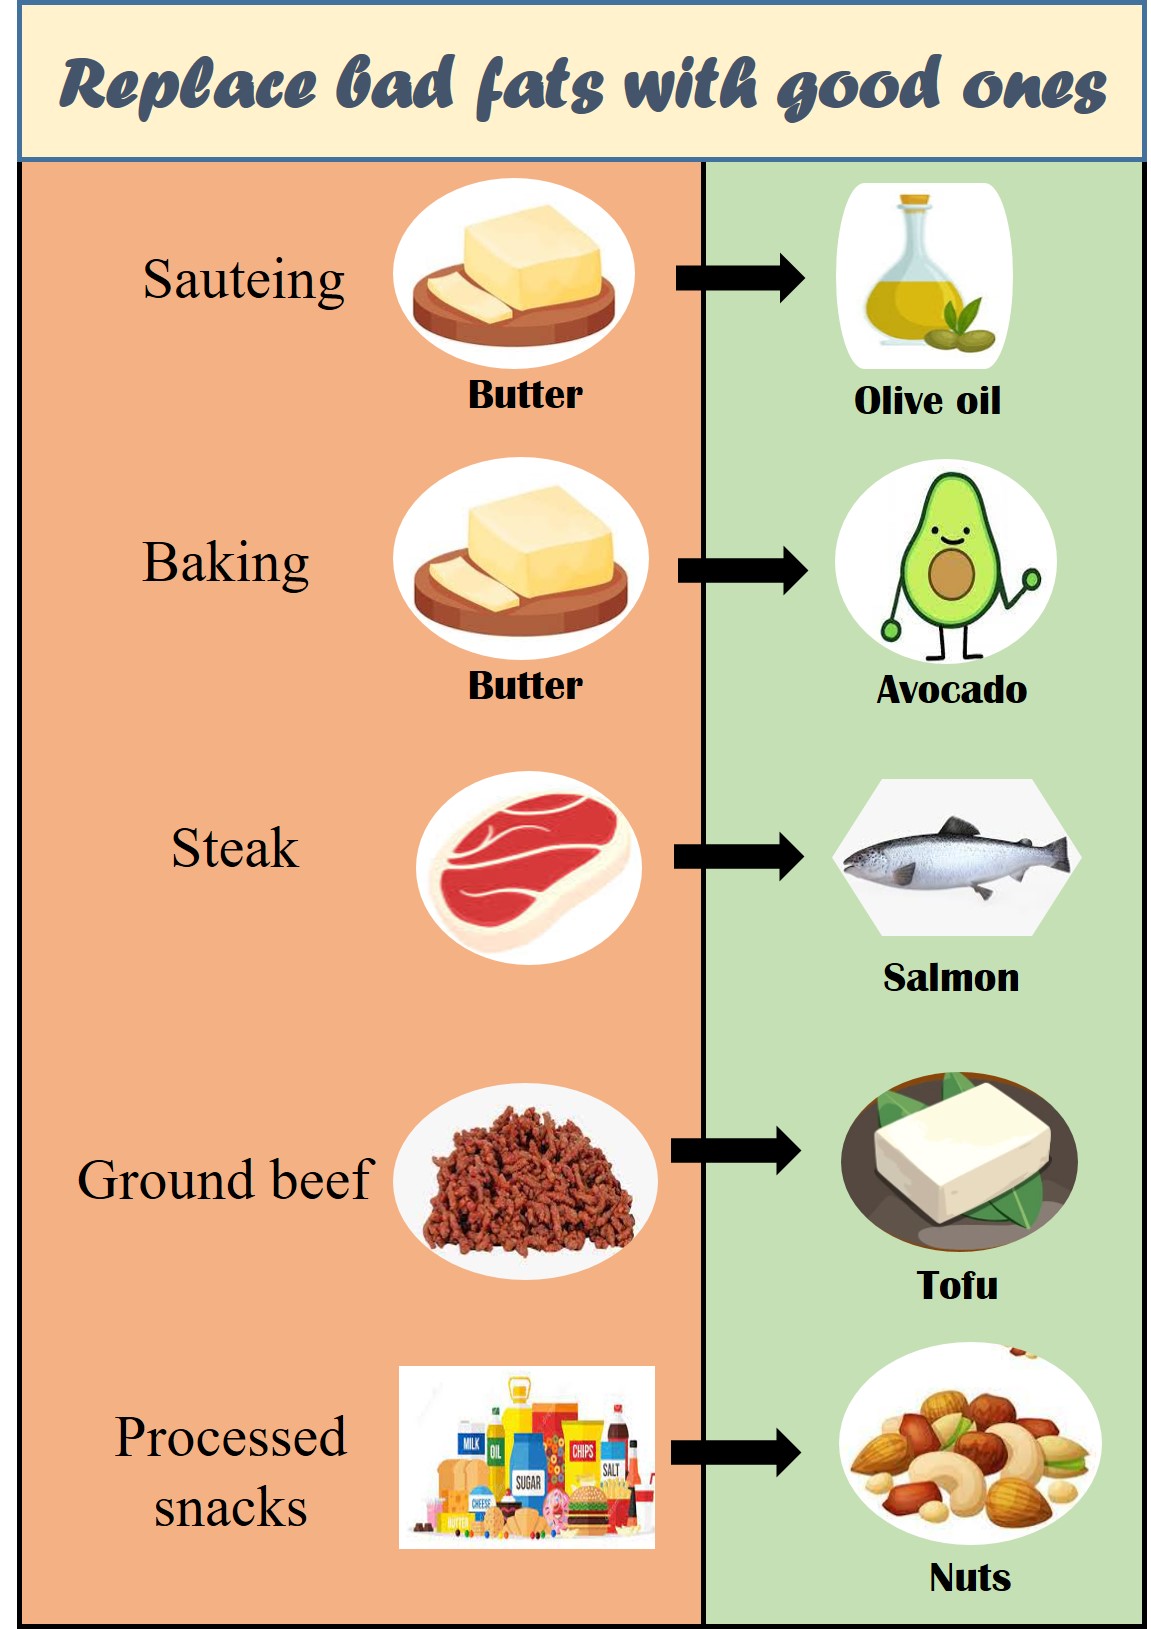 Replace bad fats with good ones
saturated fat vs unsaturated fats
saturated fat sources 